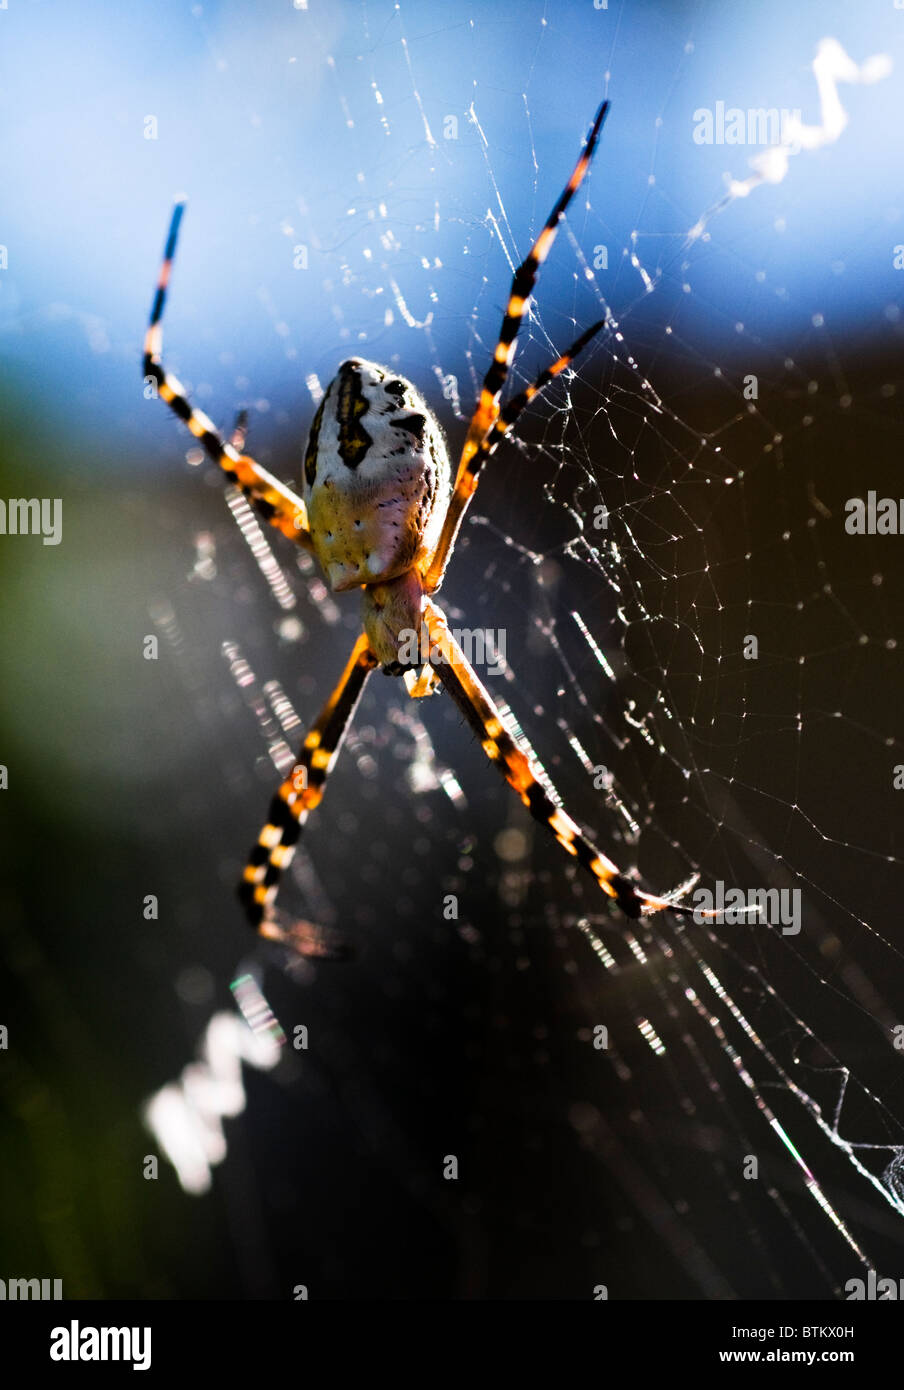 A Silver Argiope or (Argiope argentata) spider on its web. This spider is also known as a Garden Orb Weaver. Stock Photo